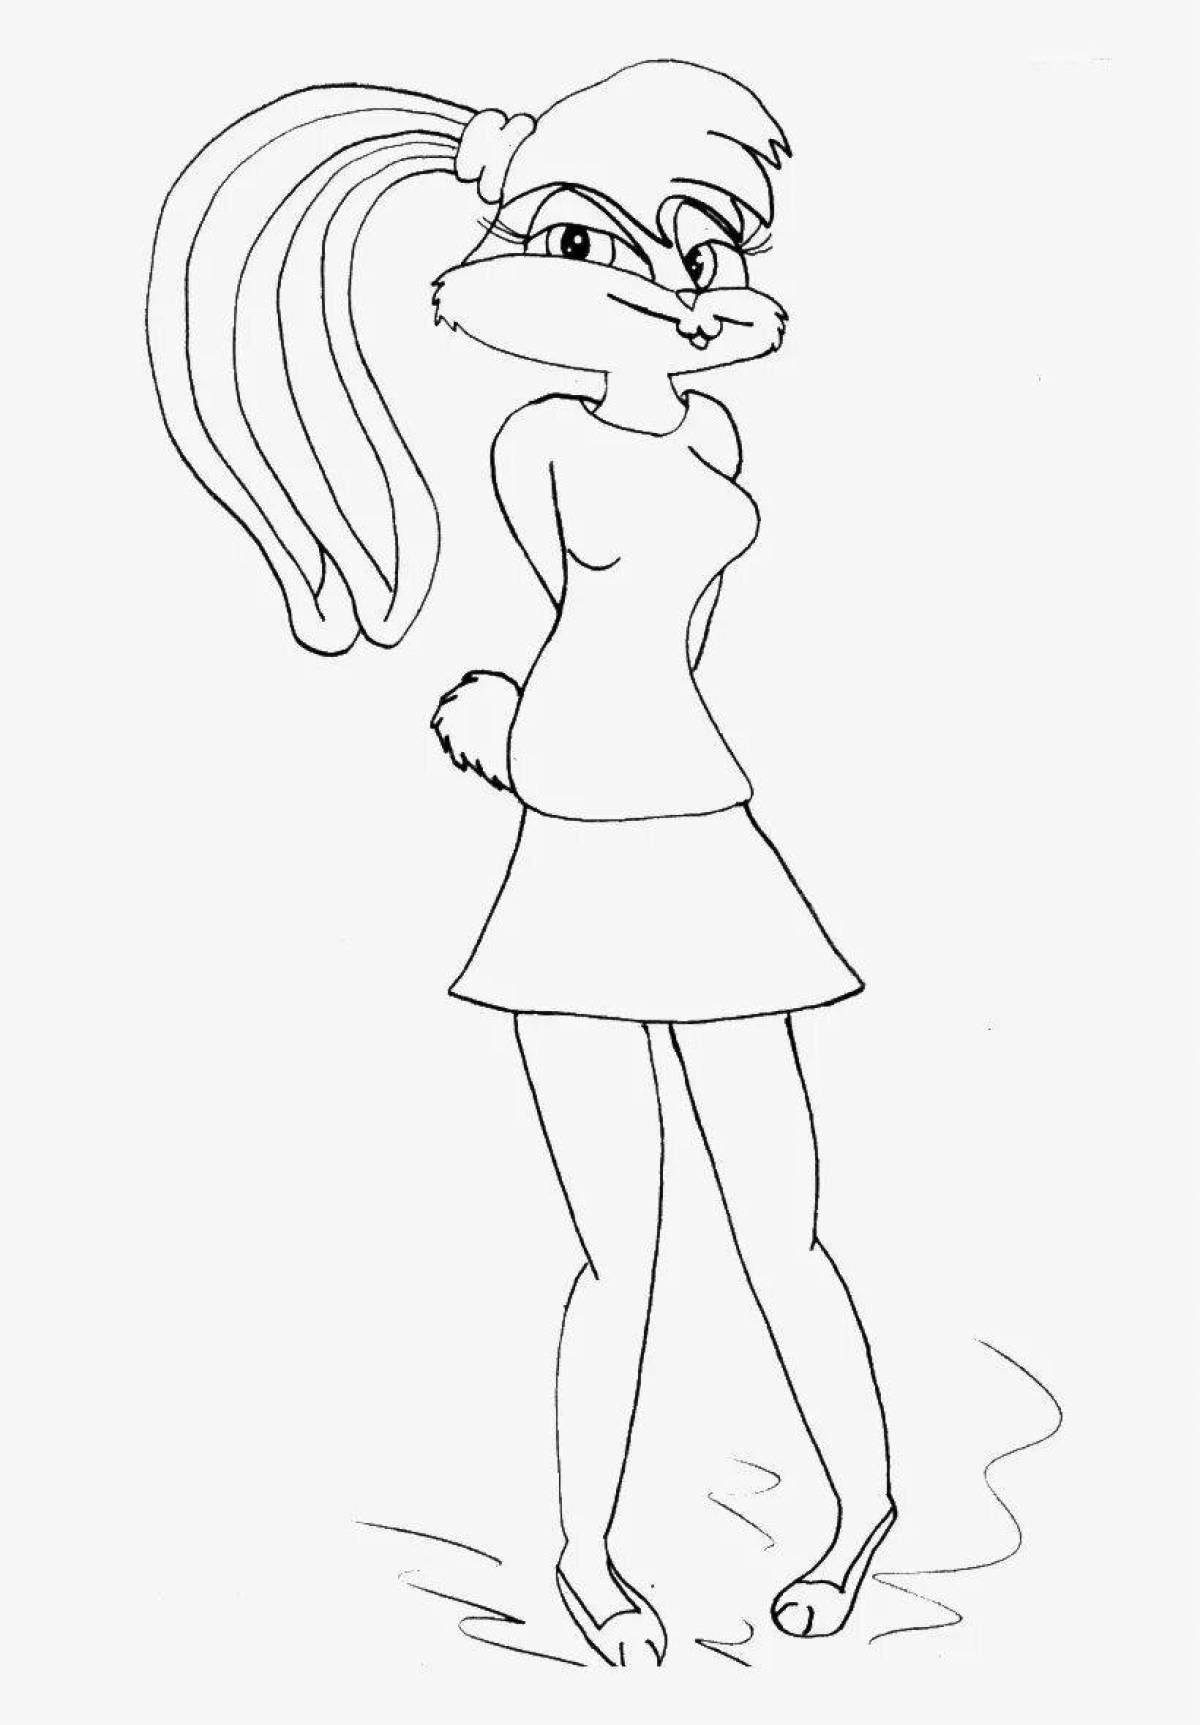 Colorful lady bunny coloring page